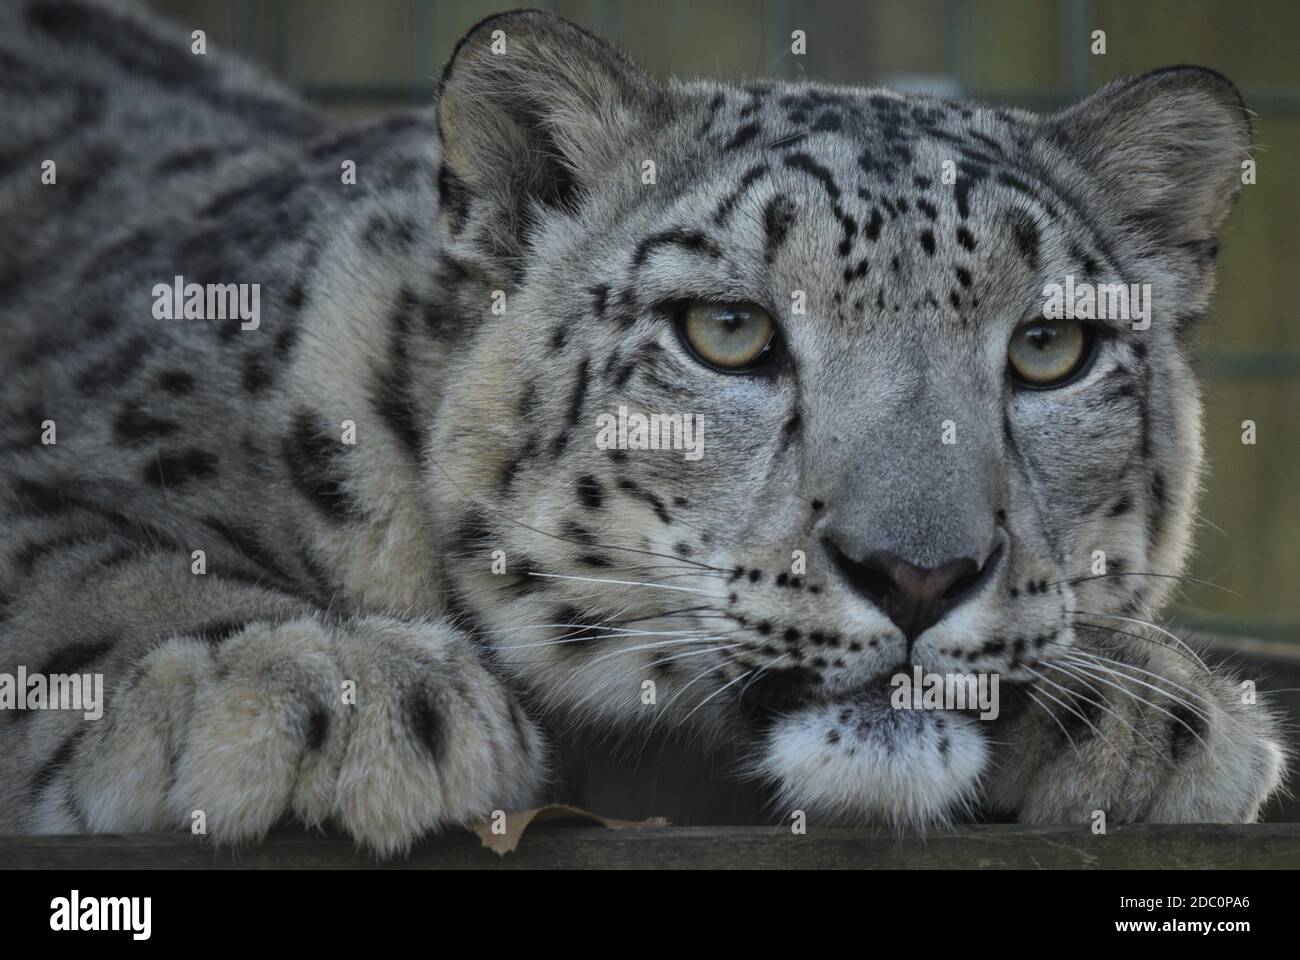 'snow leopard', 'face and  paws', ' Big cats eyes', 'looking at you', 'wildlife conservation', 'Asian big cat', 'carnivore', 'interested' Stock Photo